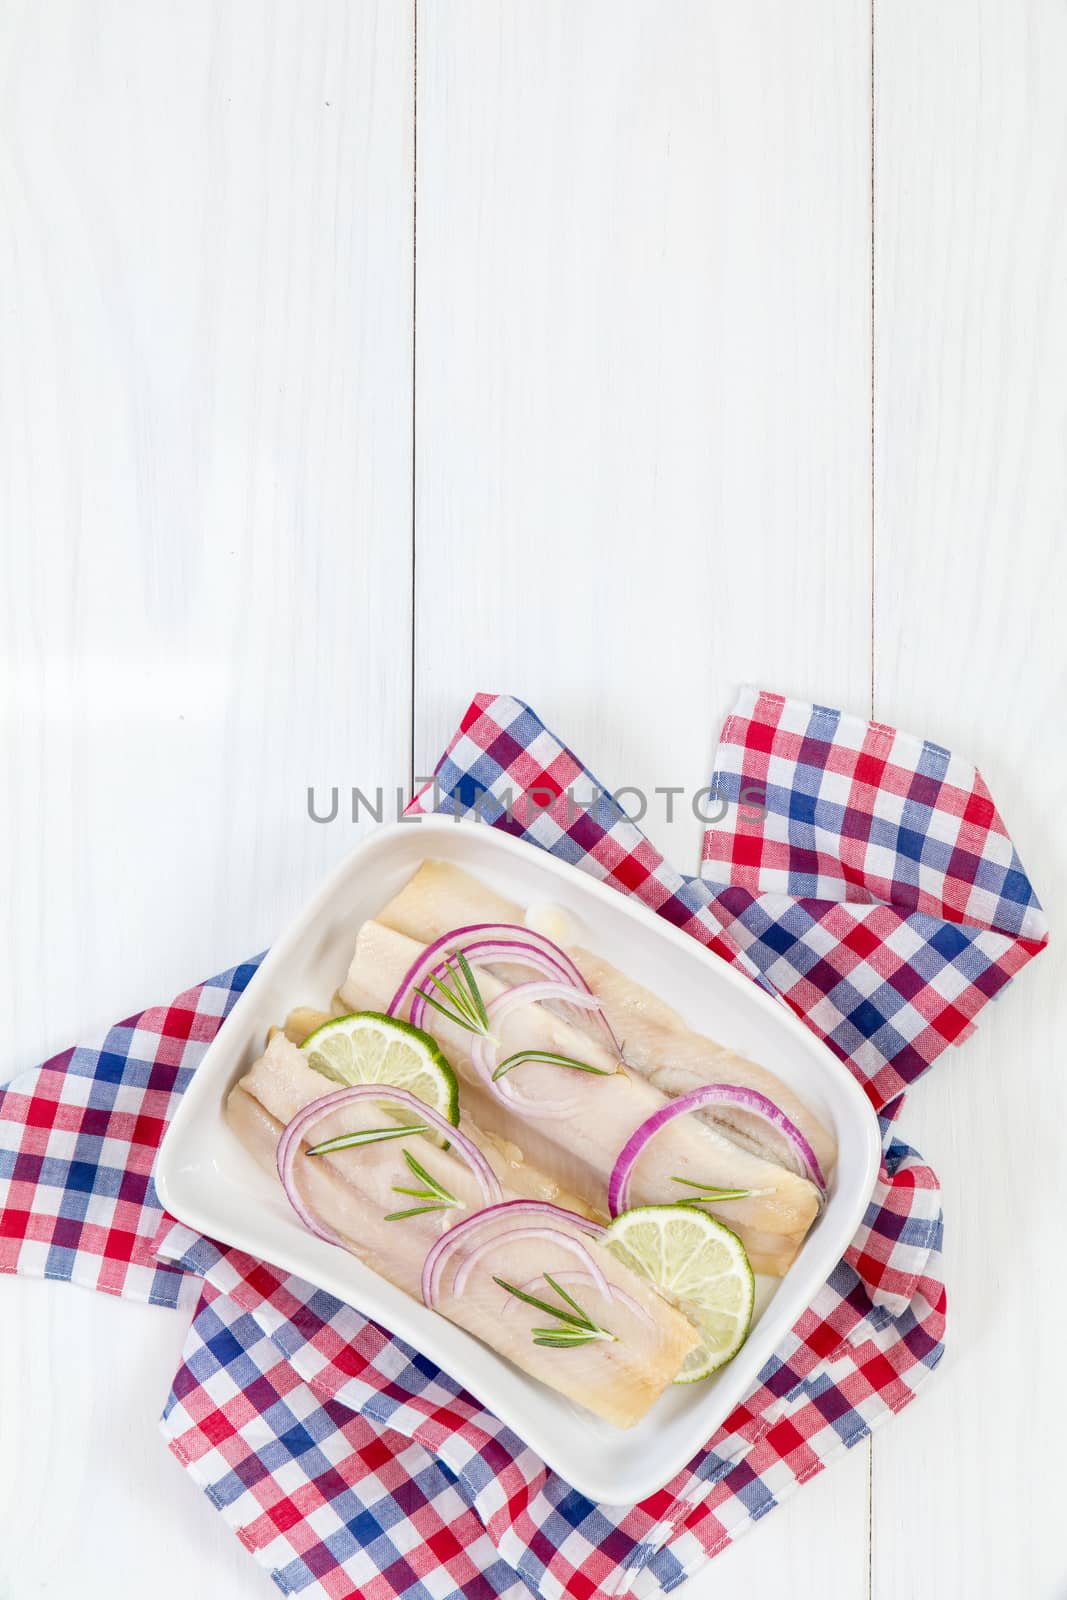 Sliced herring fillets, cut onion and lime by ArtSvitlyna